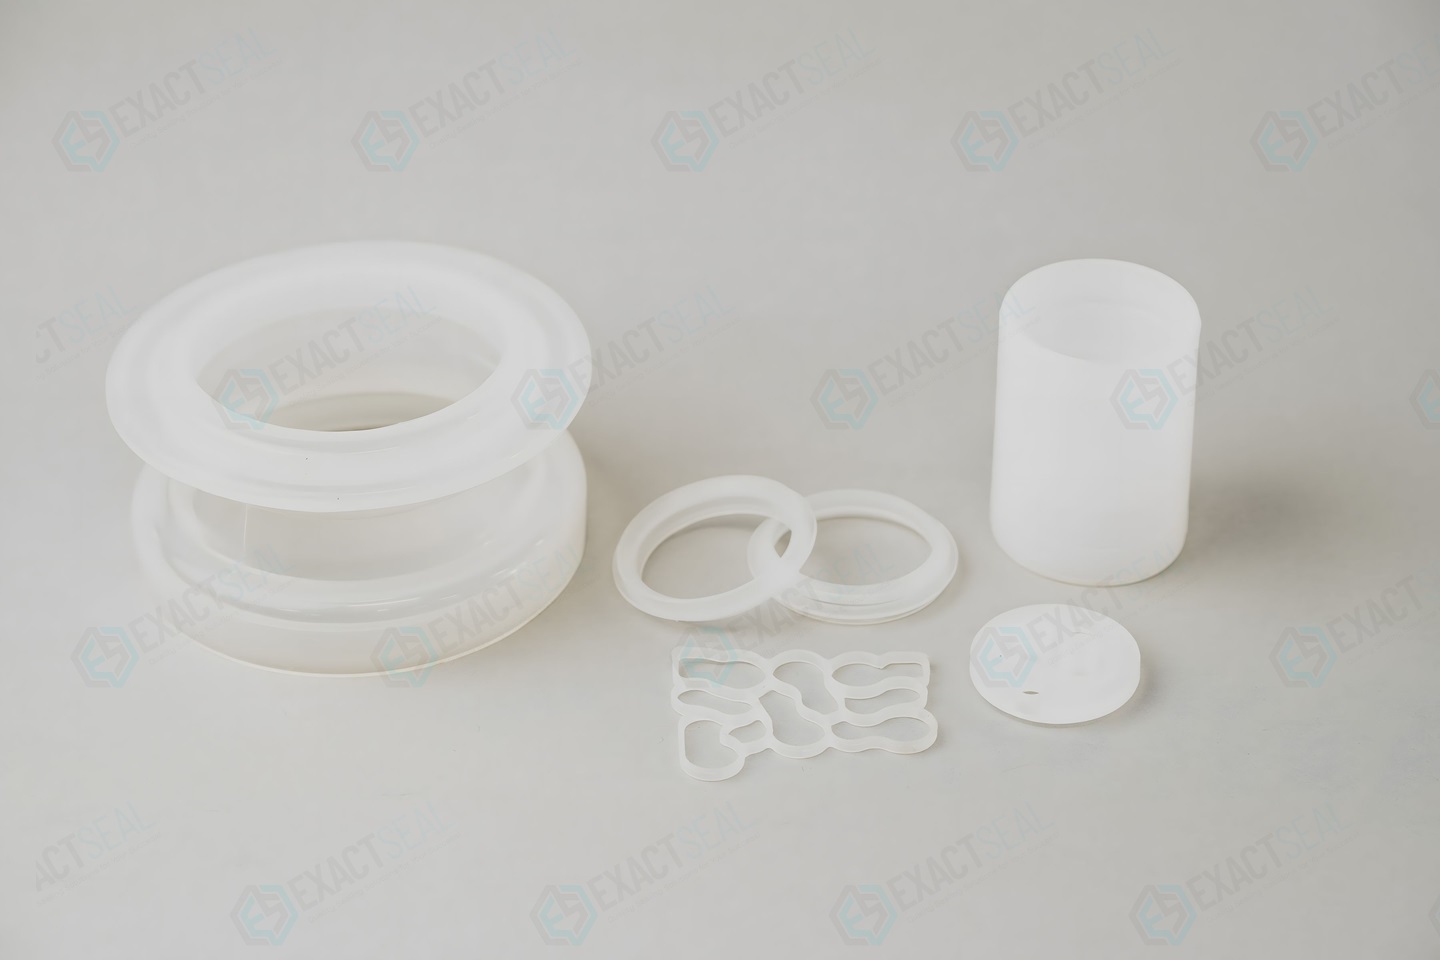 USP Class 6 Platinum Cured Silicone Rubber Molded Parts